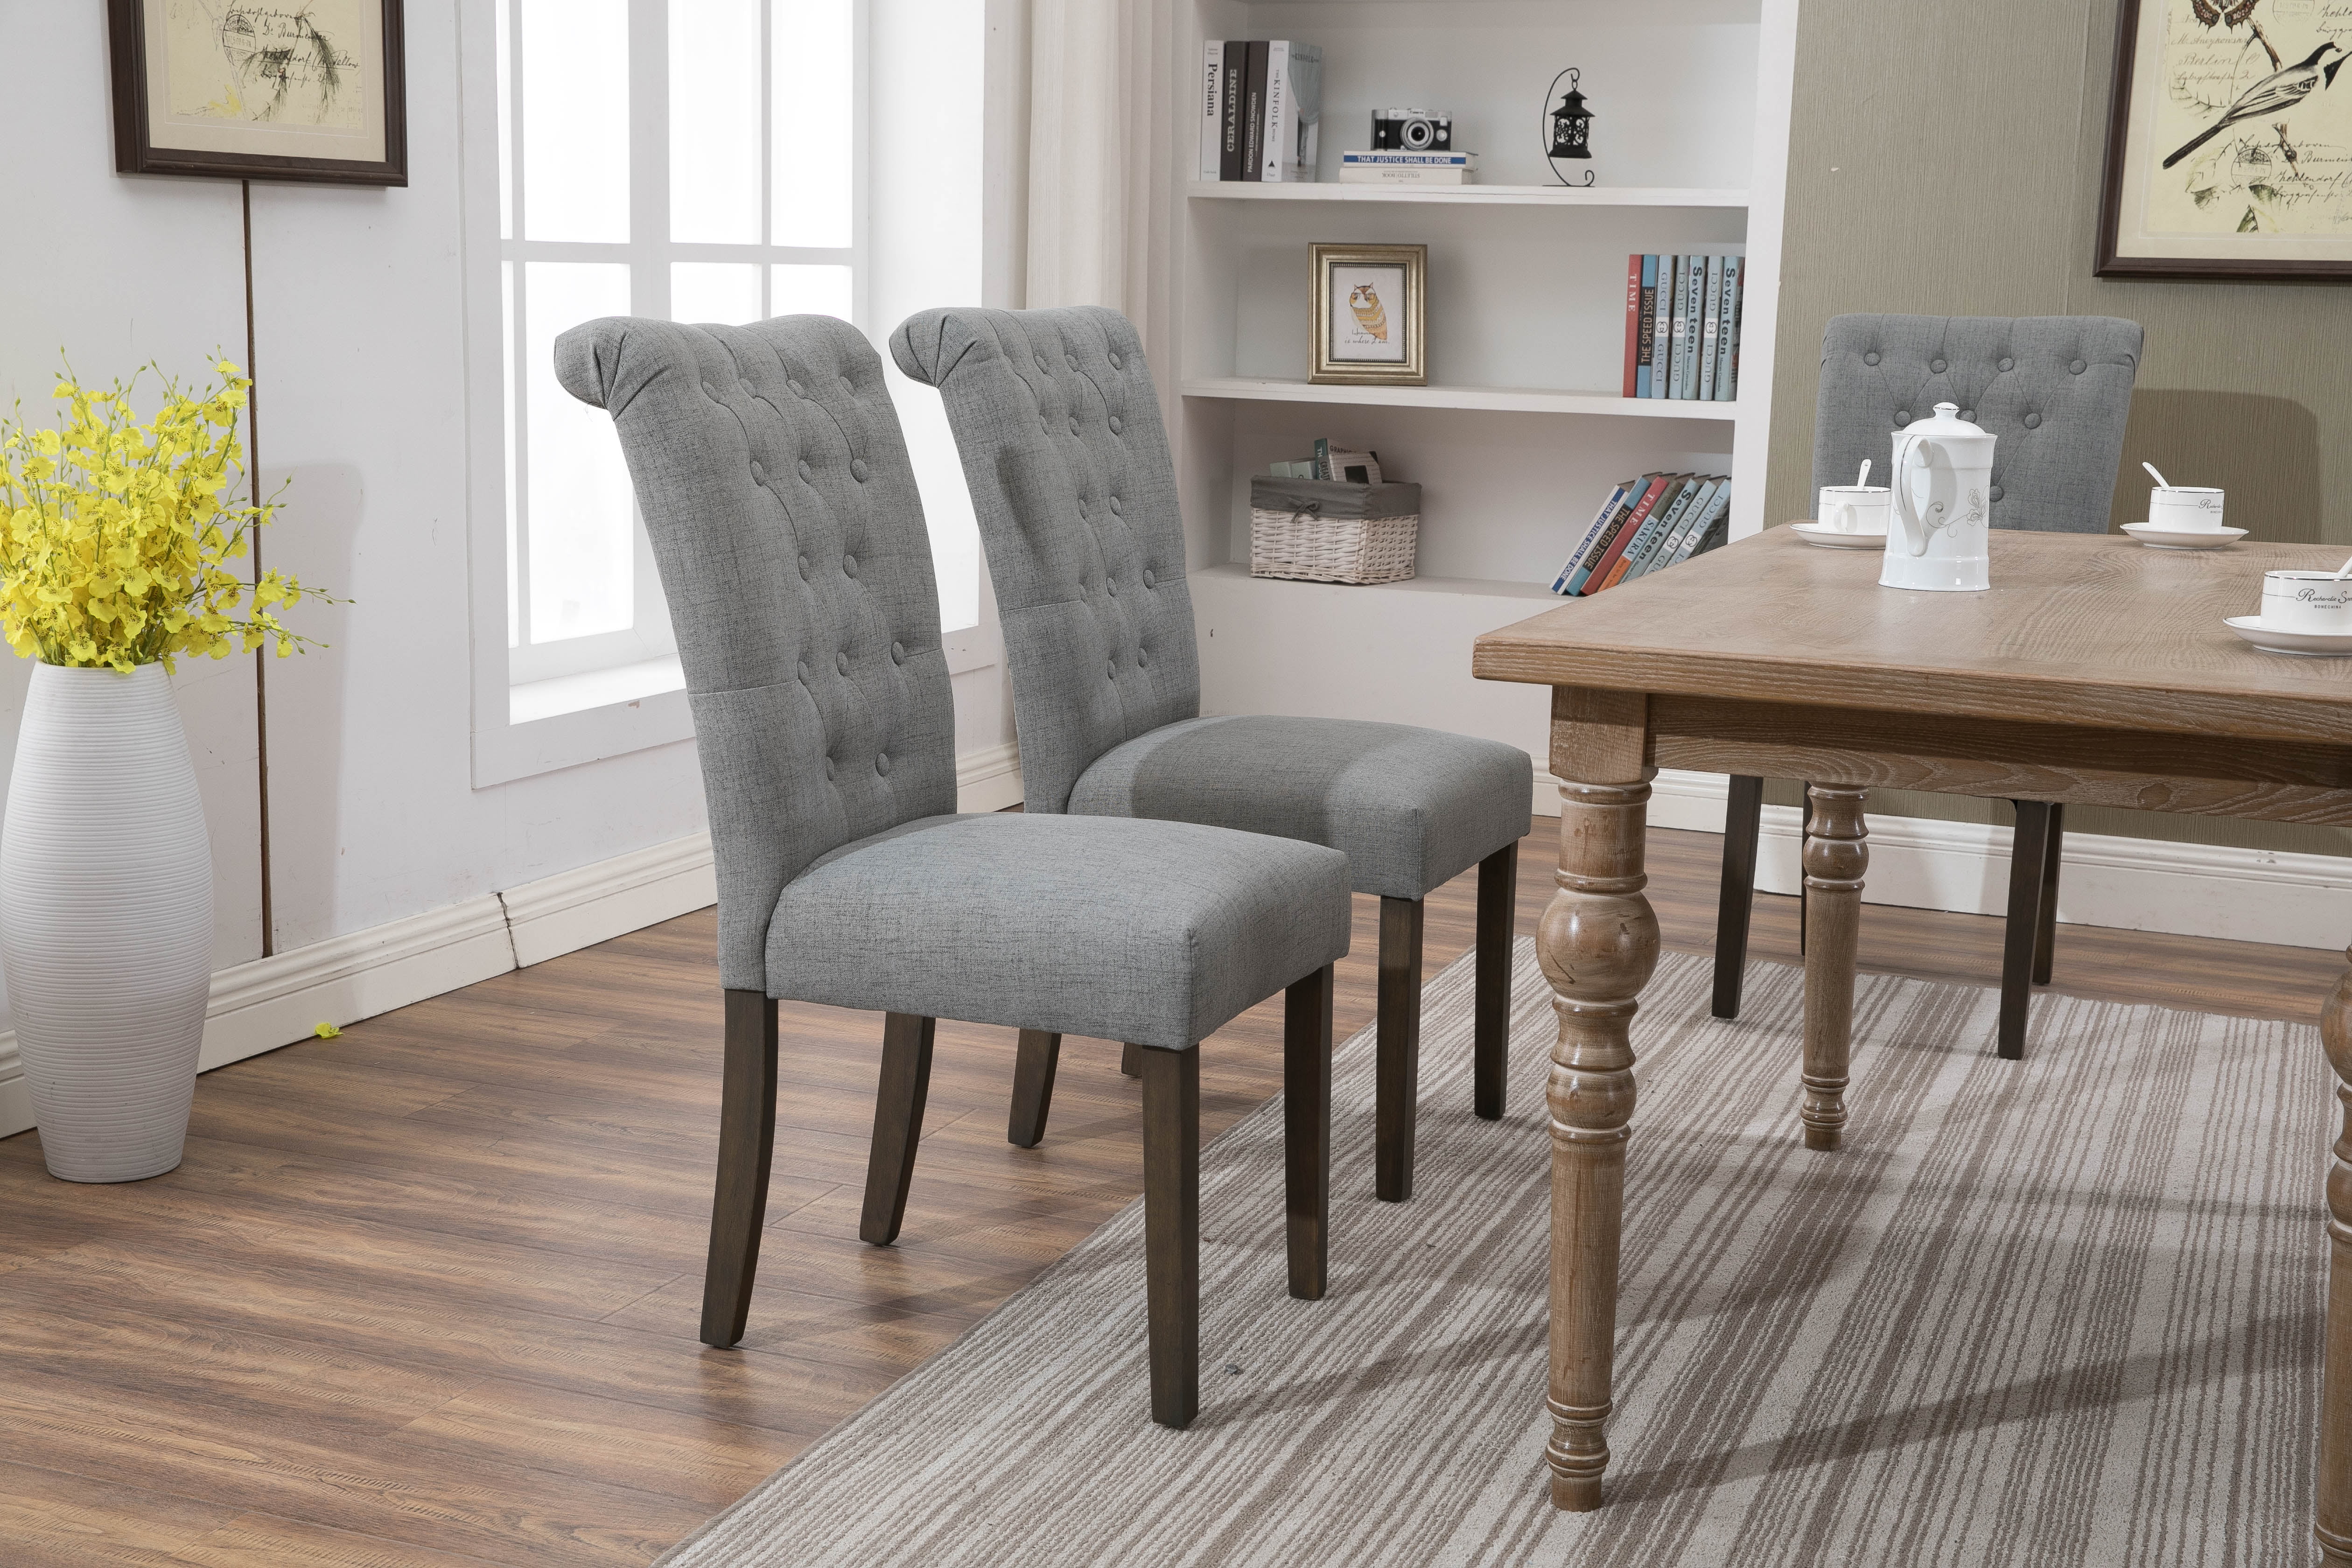 kitchen or dining room chairs